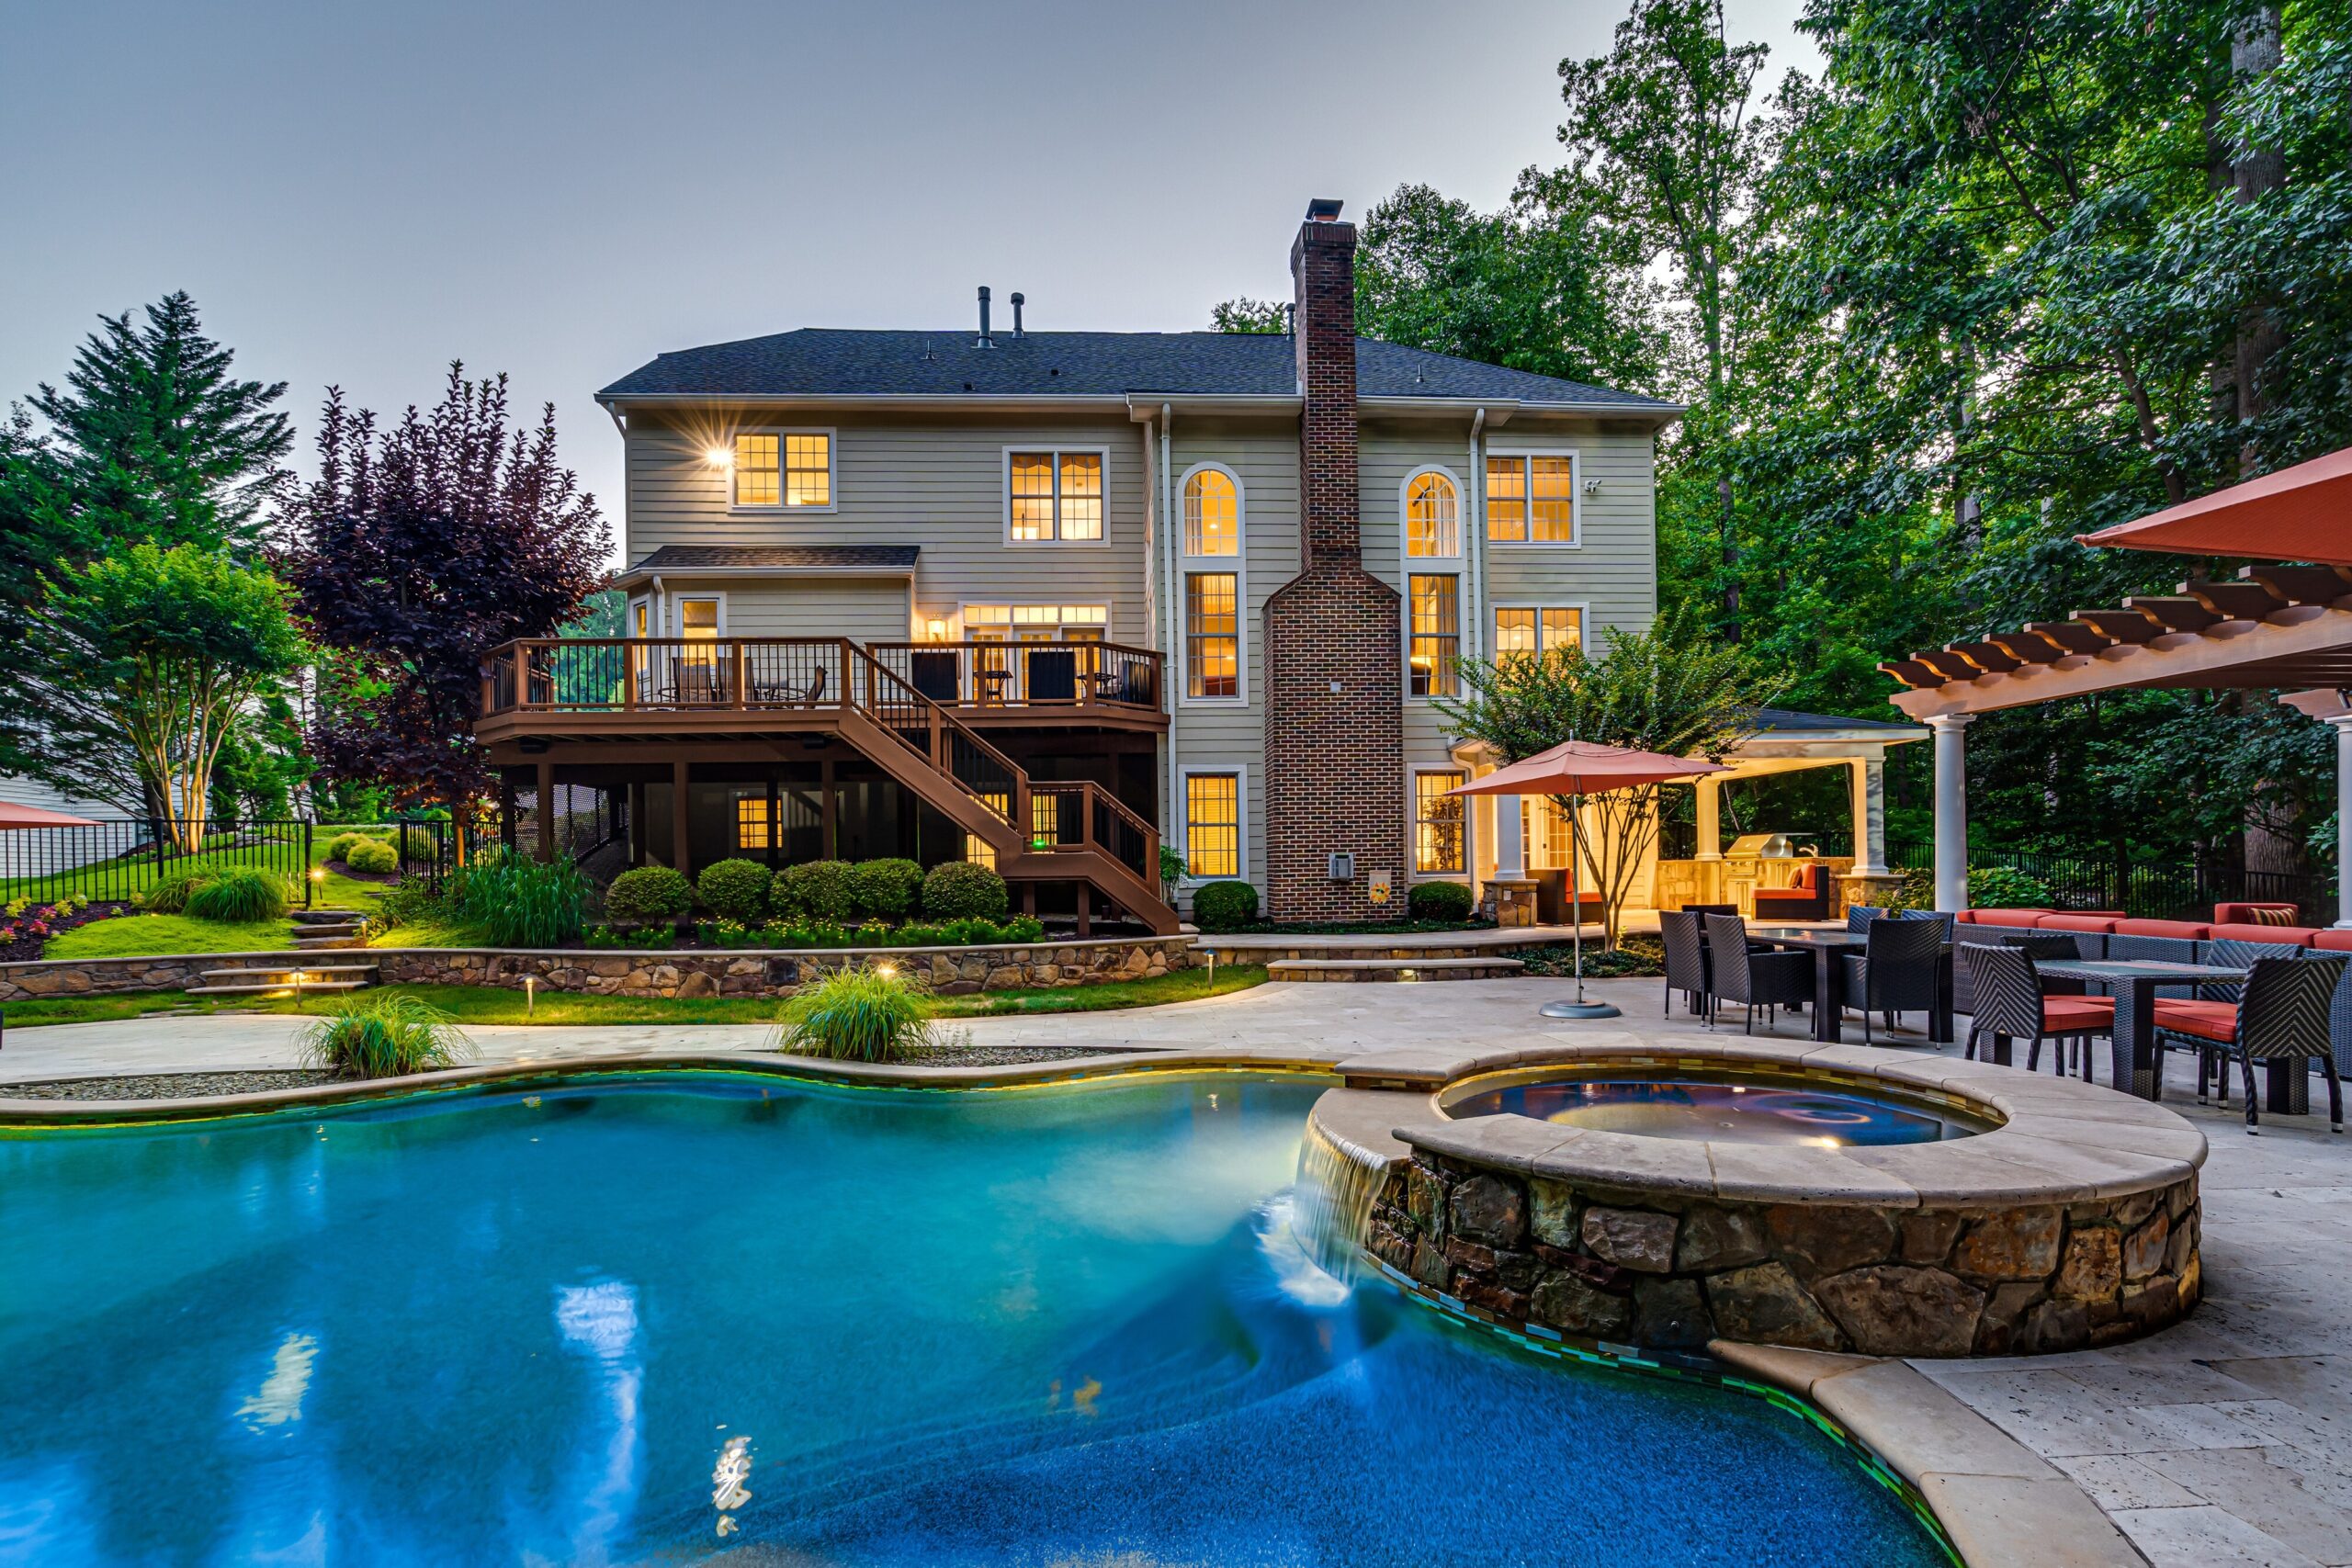 Exterior at dusk showing pool and hot tub in the foreground and lounge area and home in the background. 10703 Ox Croft Ct, Fairfax Station, VA